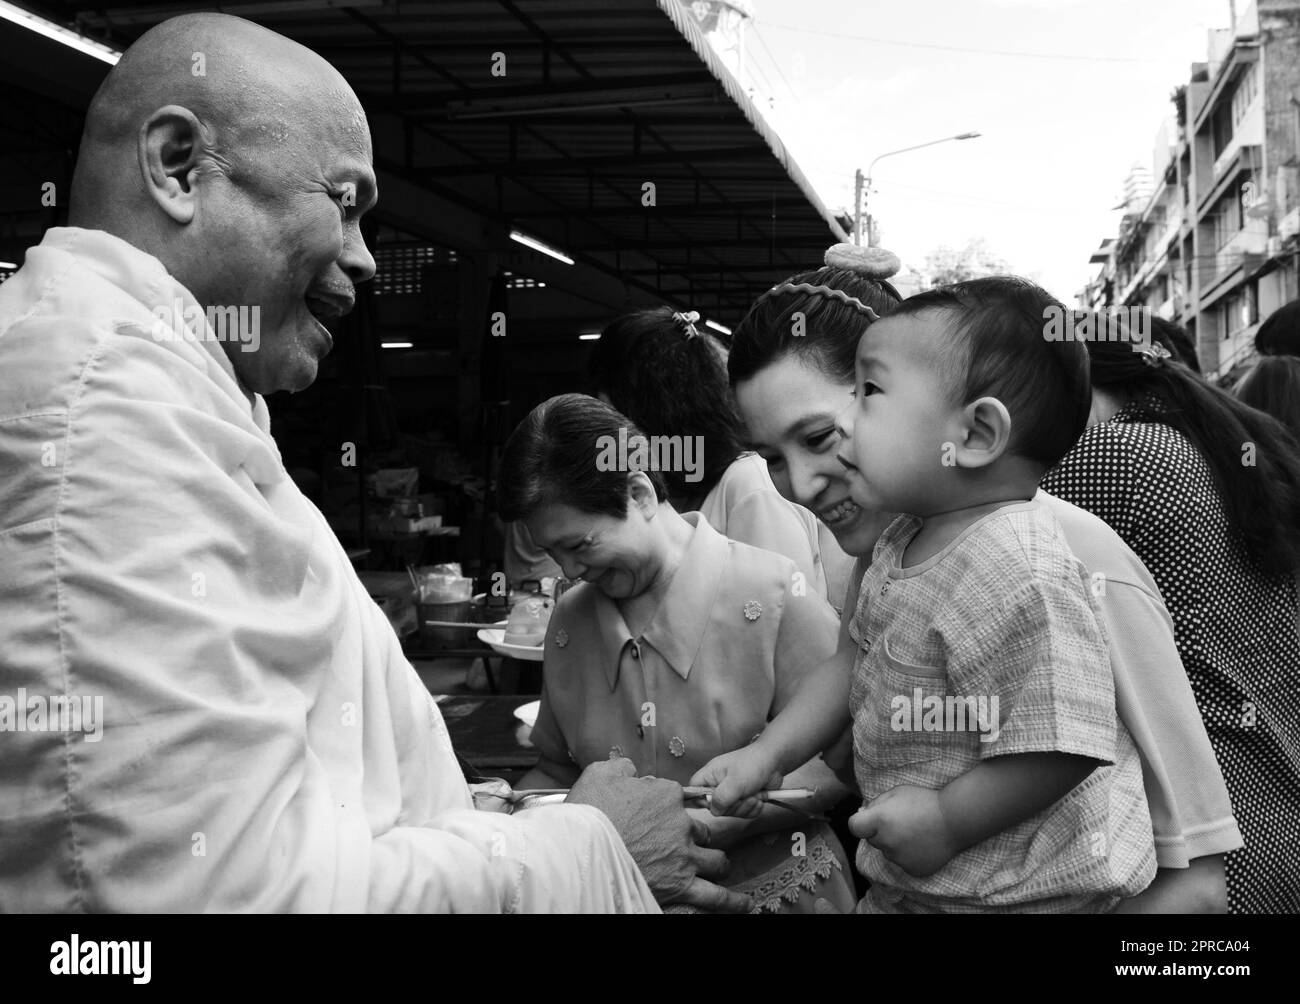 A Thai Buddhist monk blessing locals and receiving alms as part of a morning ritual. Photo taken in Bangkok, Thailand. Stock Photo